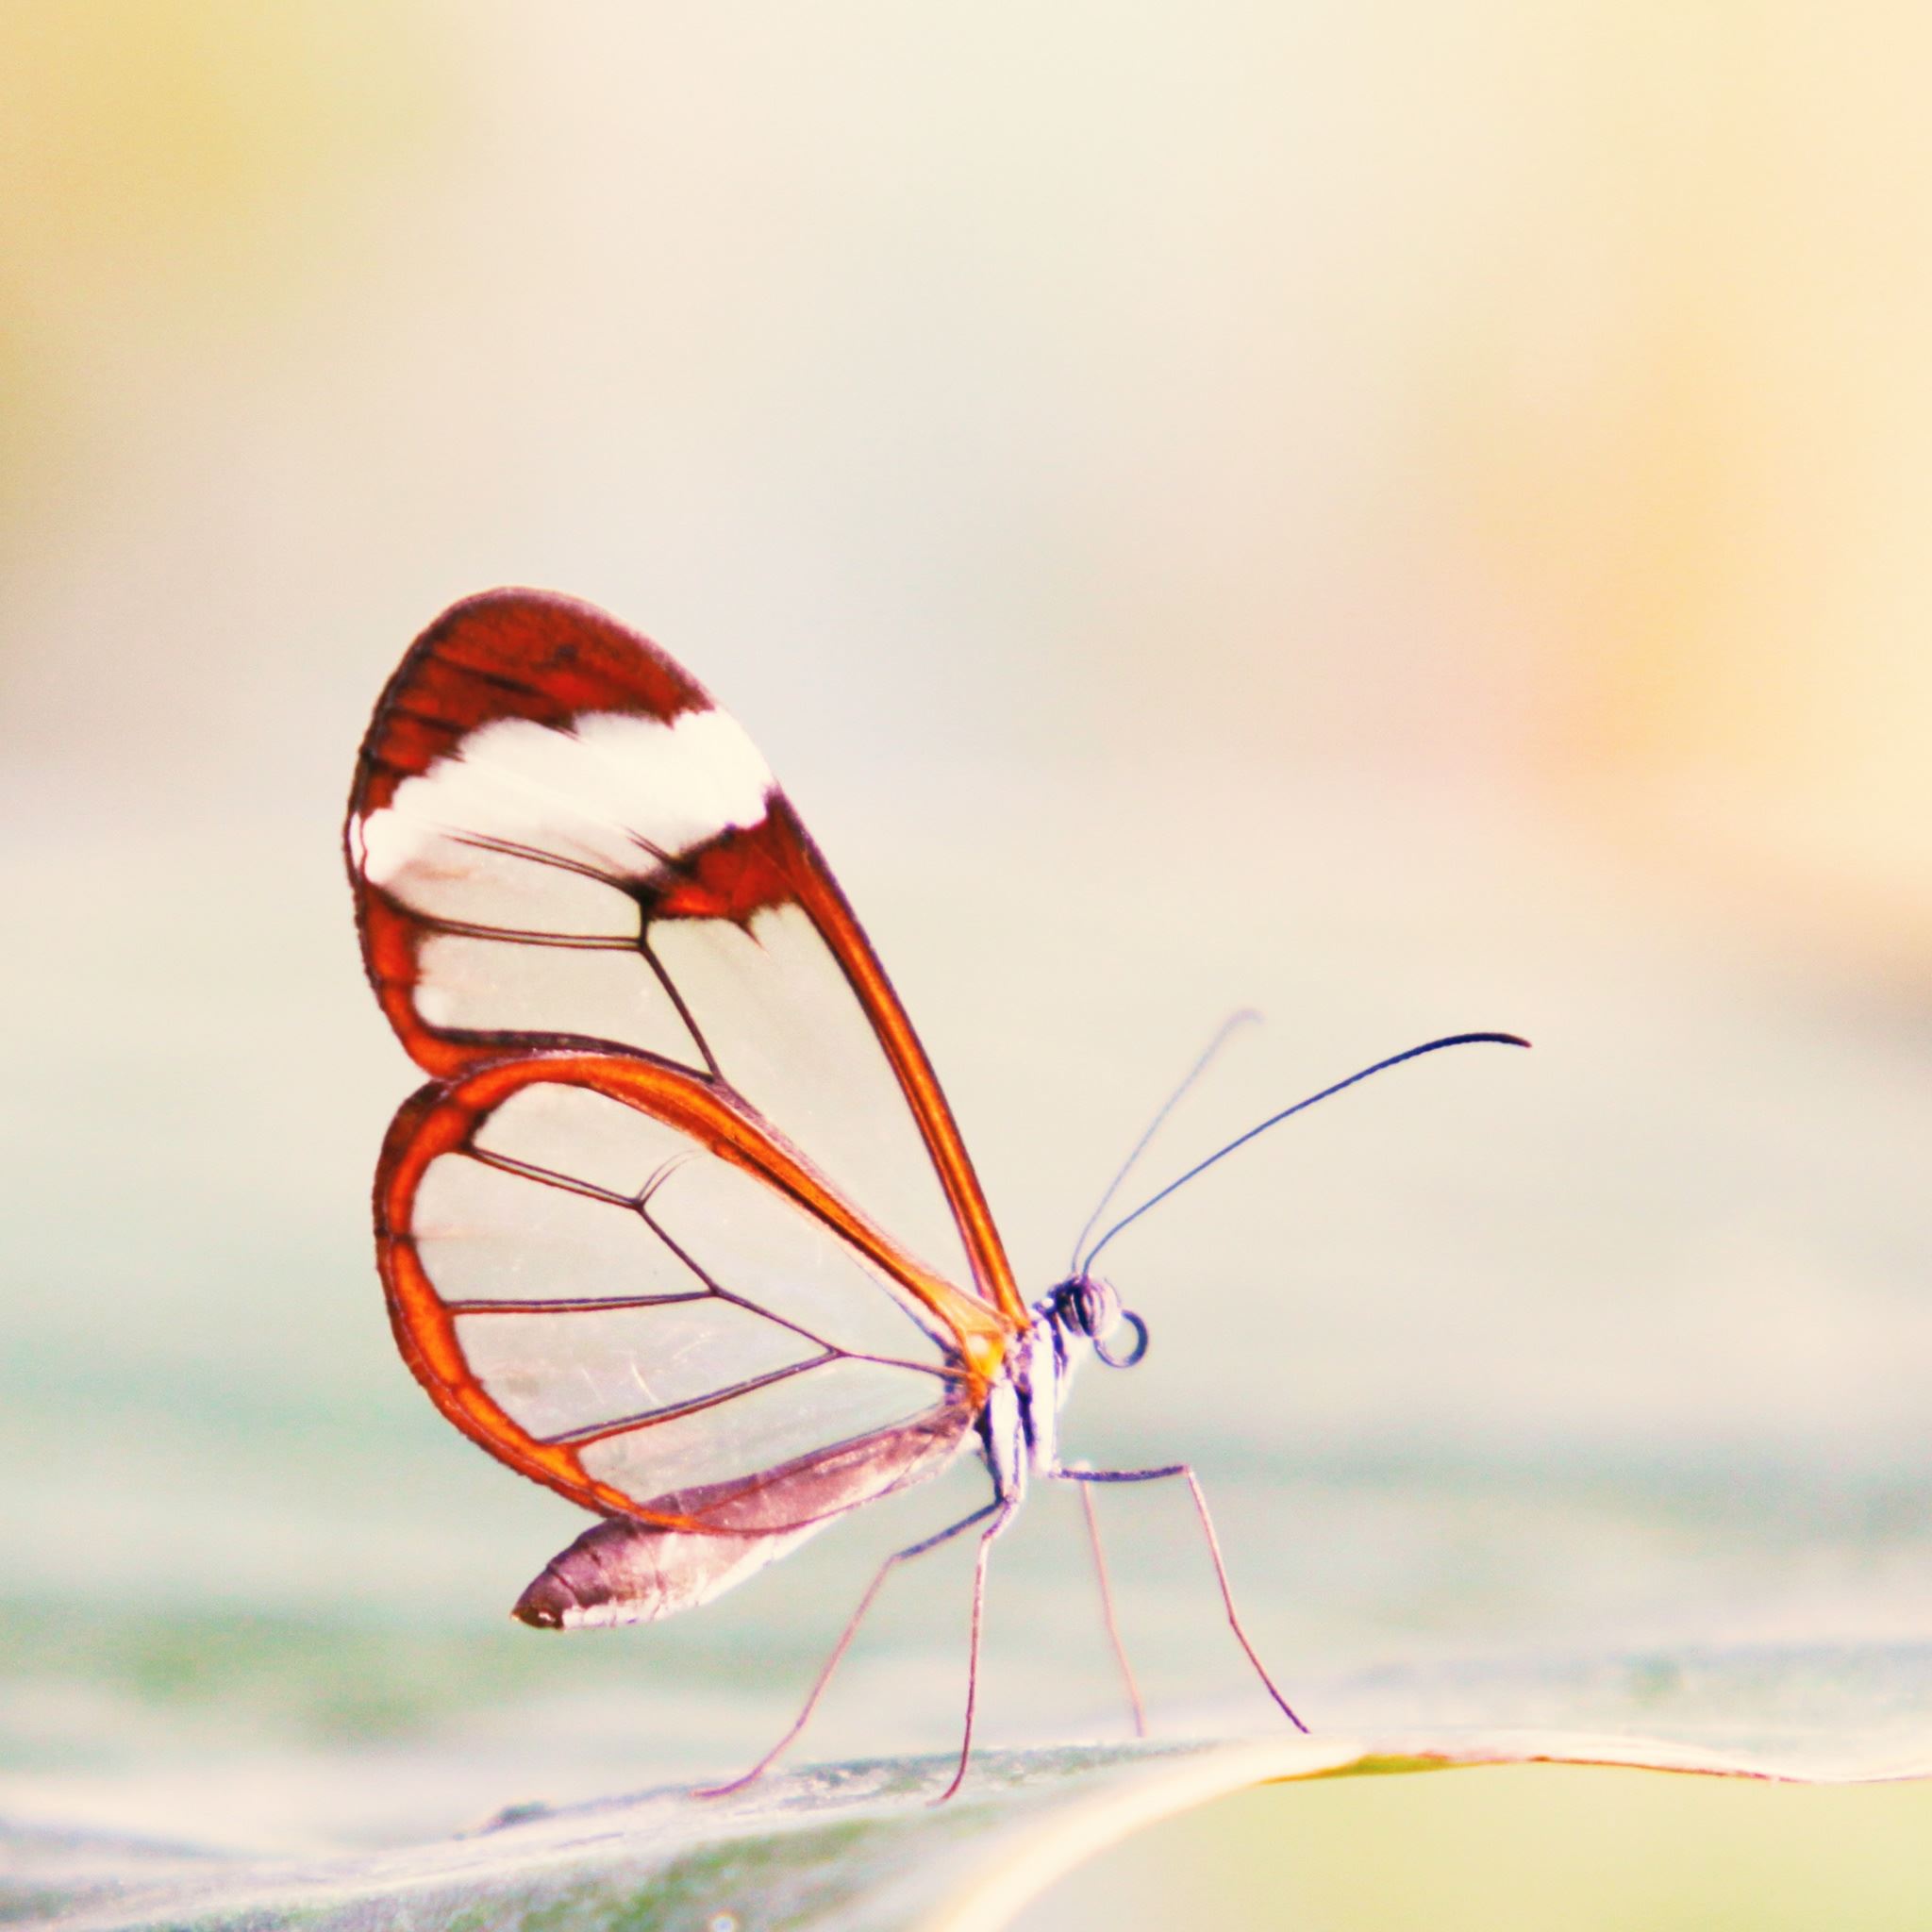 Transparent Wings Butterfly iPad Air wallpaper 